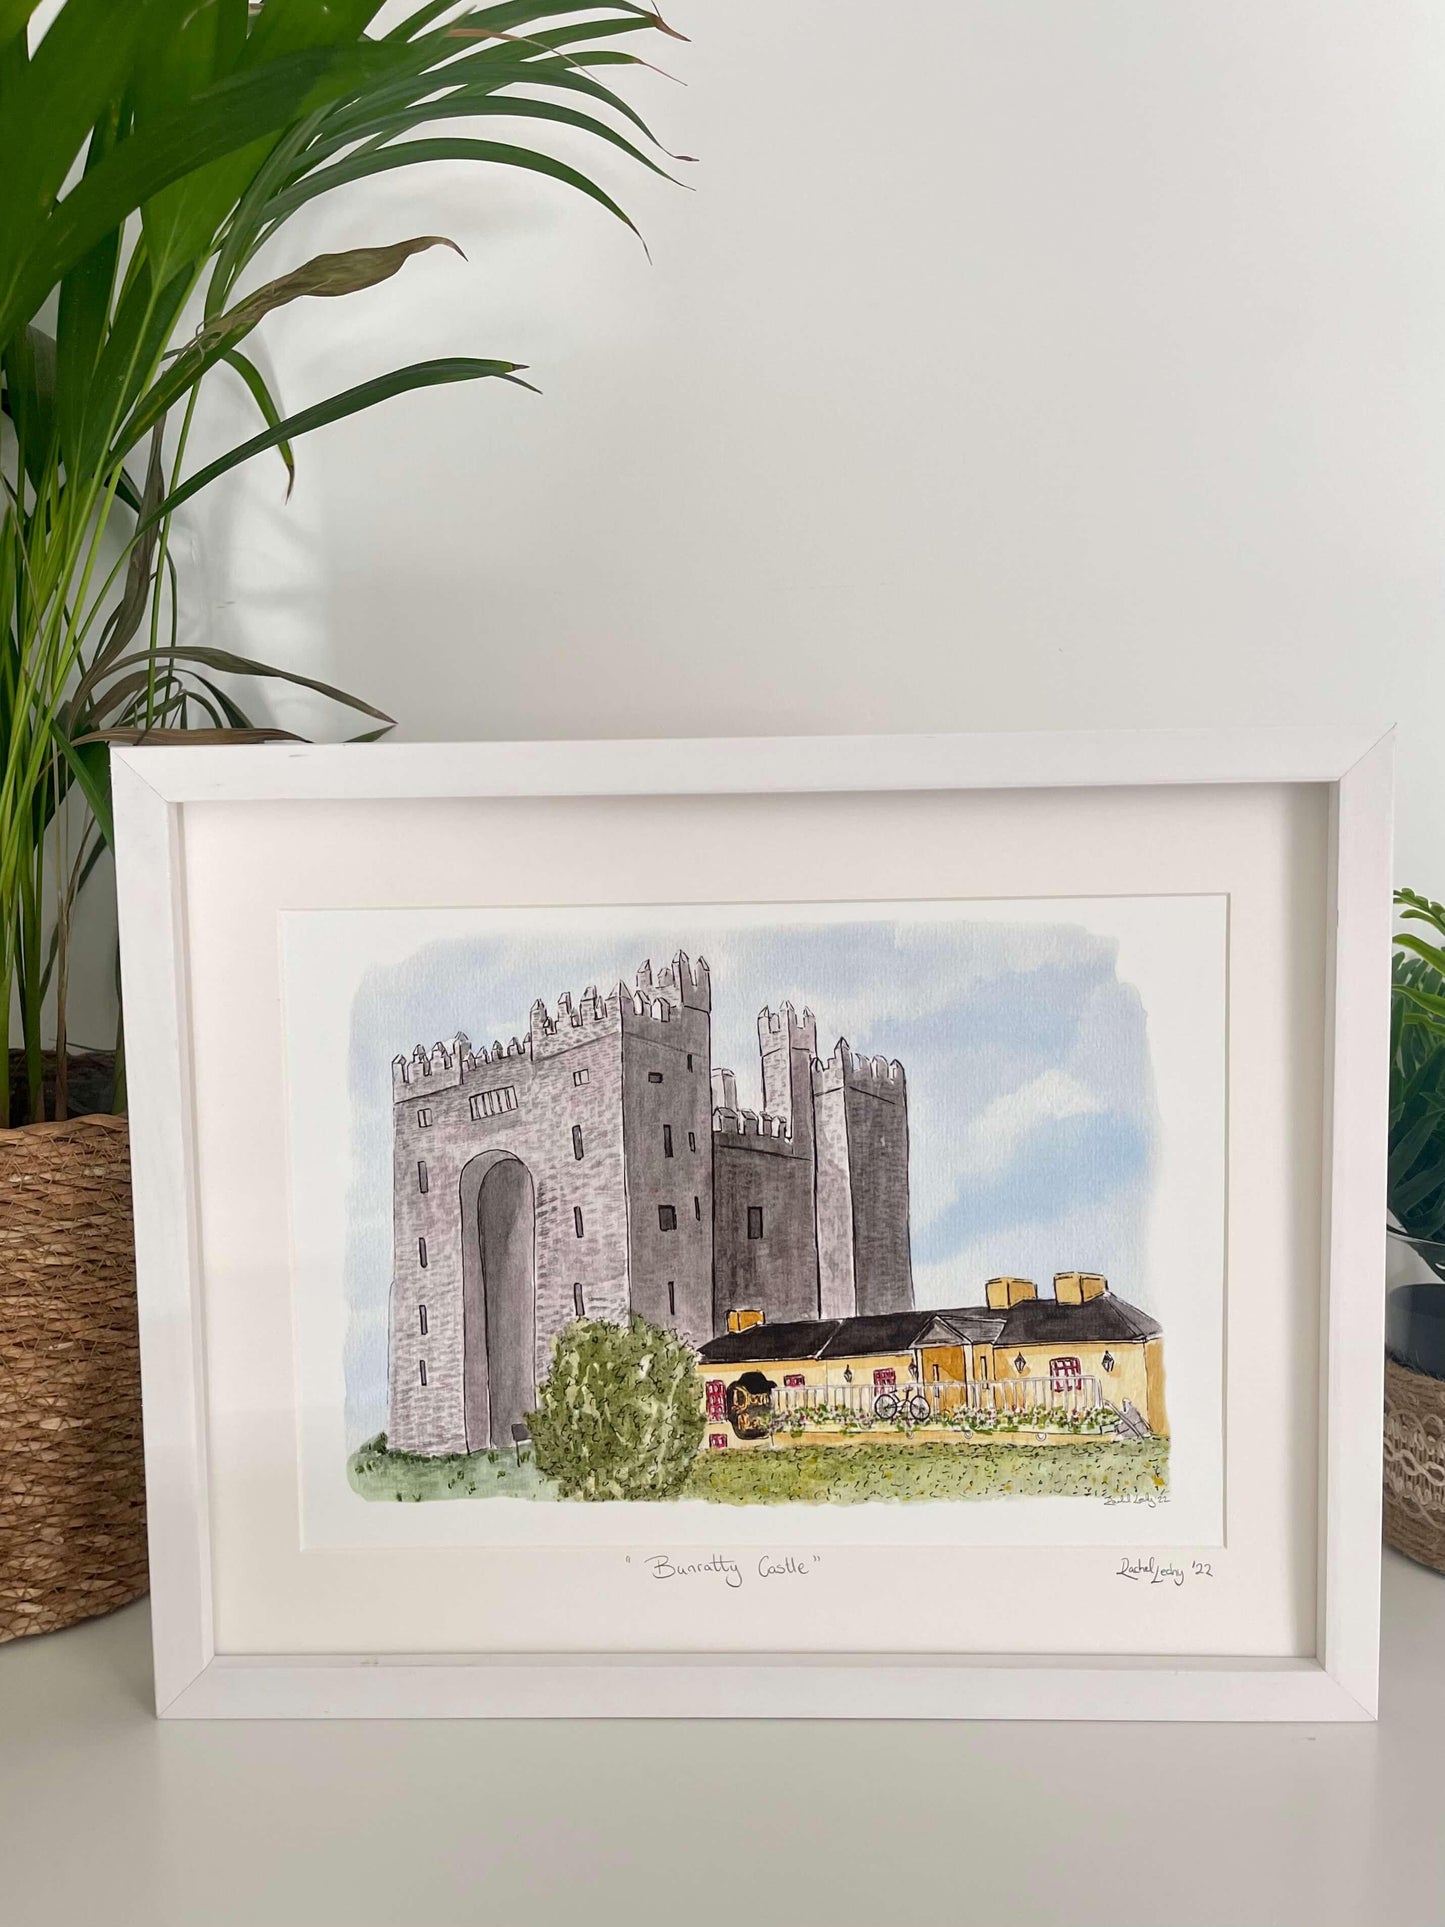 Original painting print Bunratty Castle and Durty Nellys Co Clare landmark and tourist attraction. Gift idea and keepsake